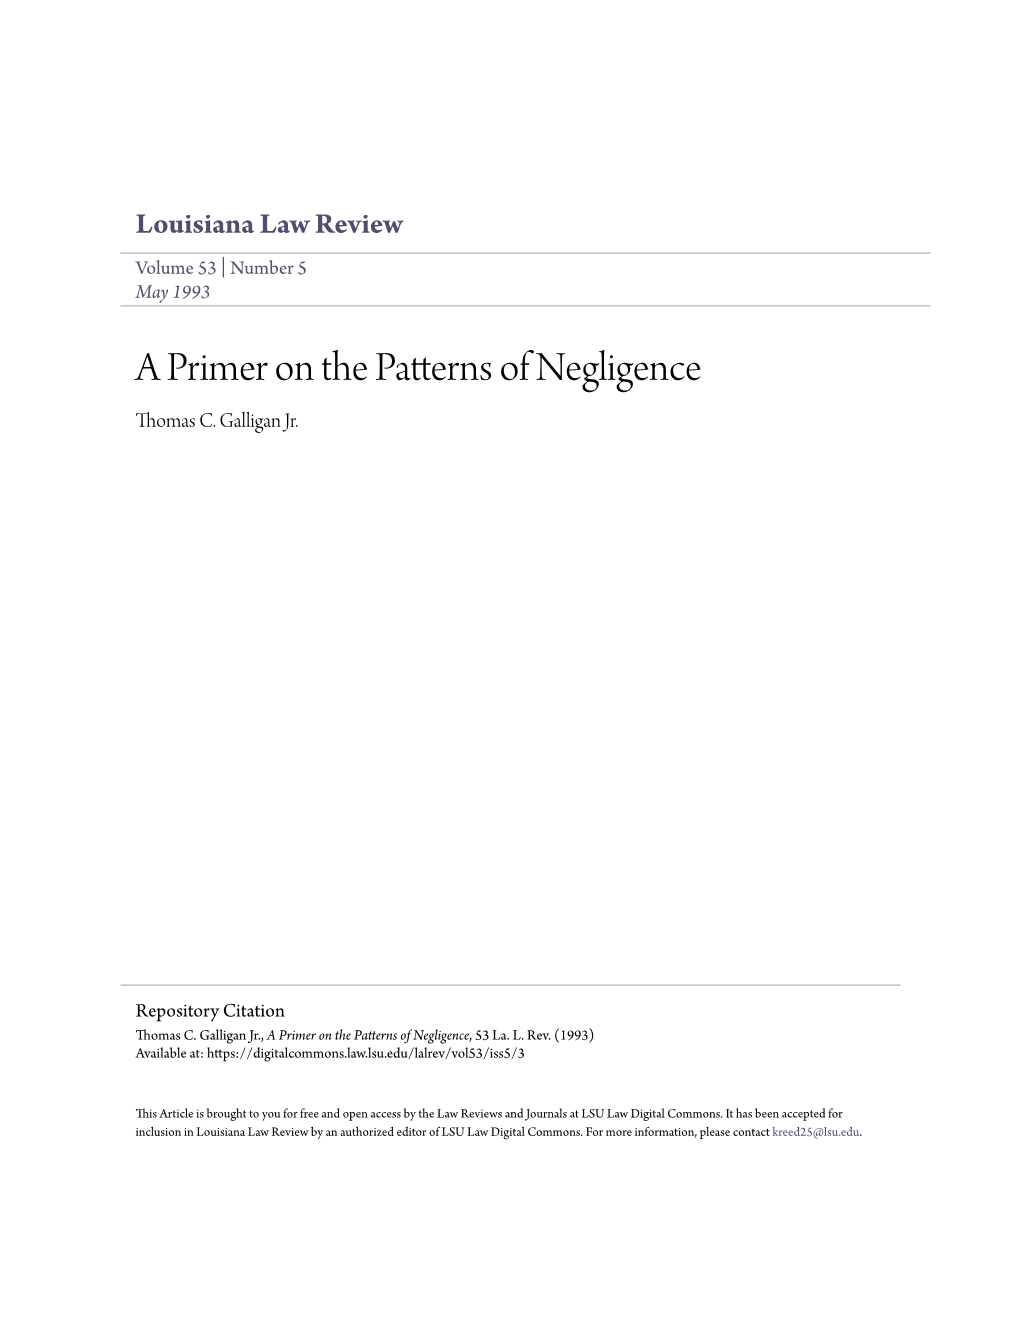 A Primer on the Patterns of Negligence Thomas C